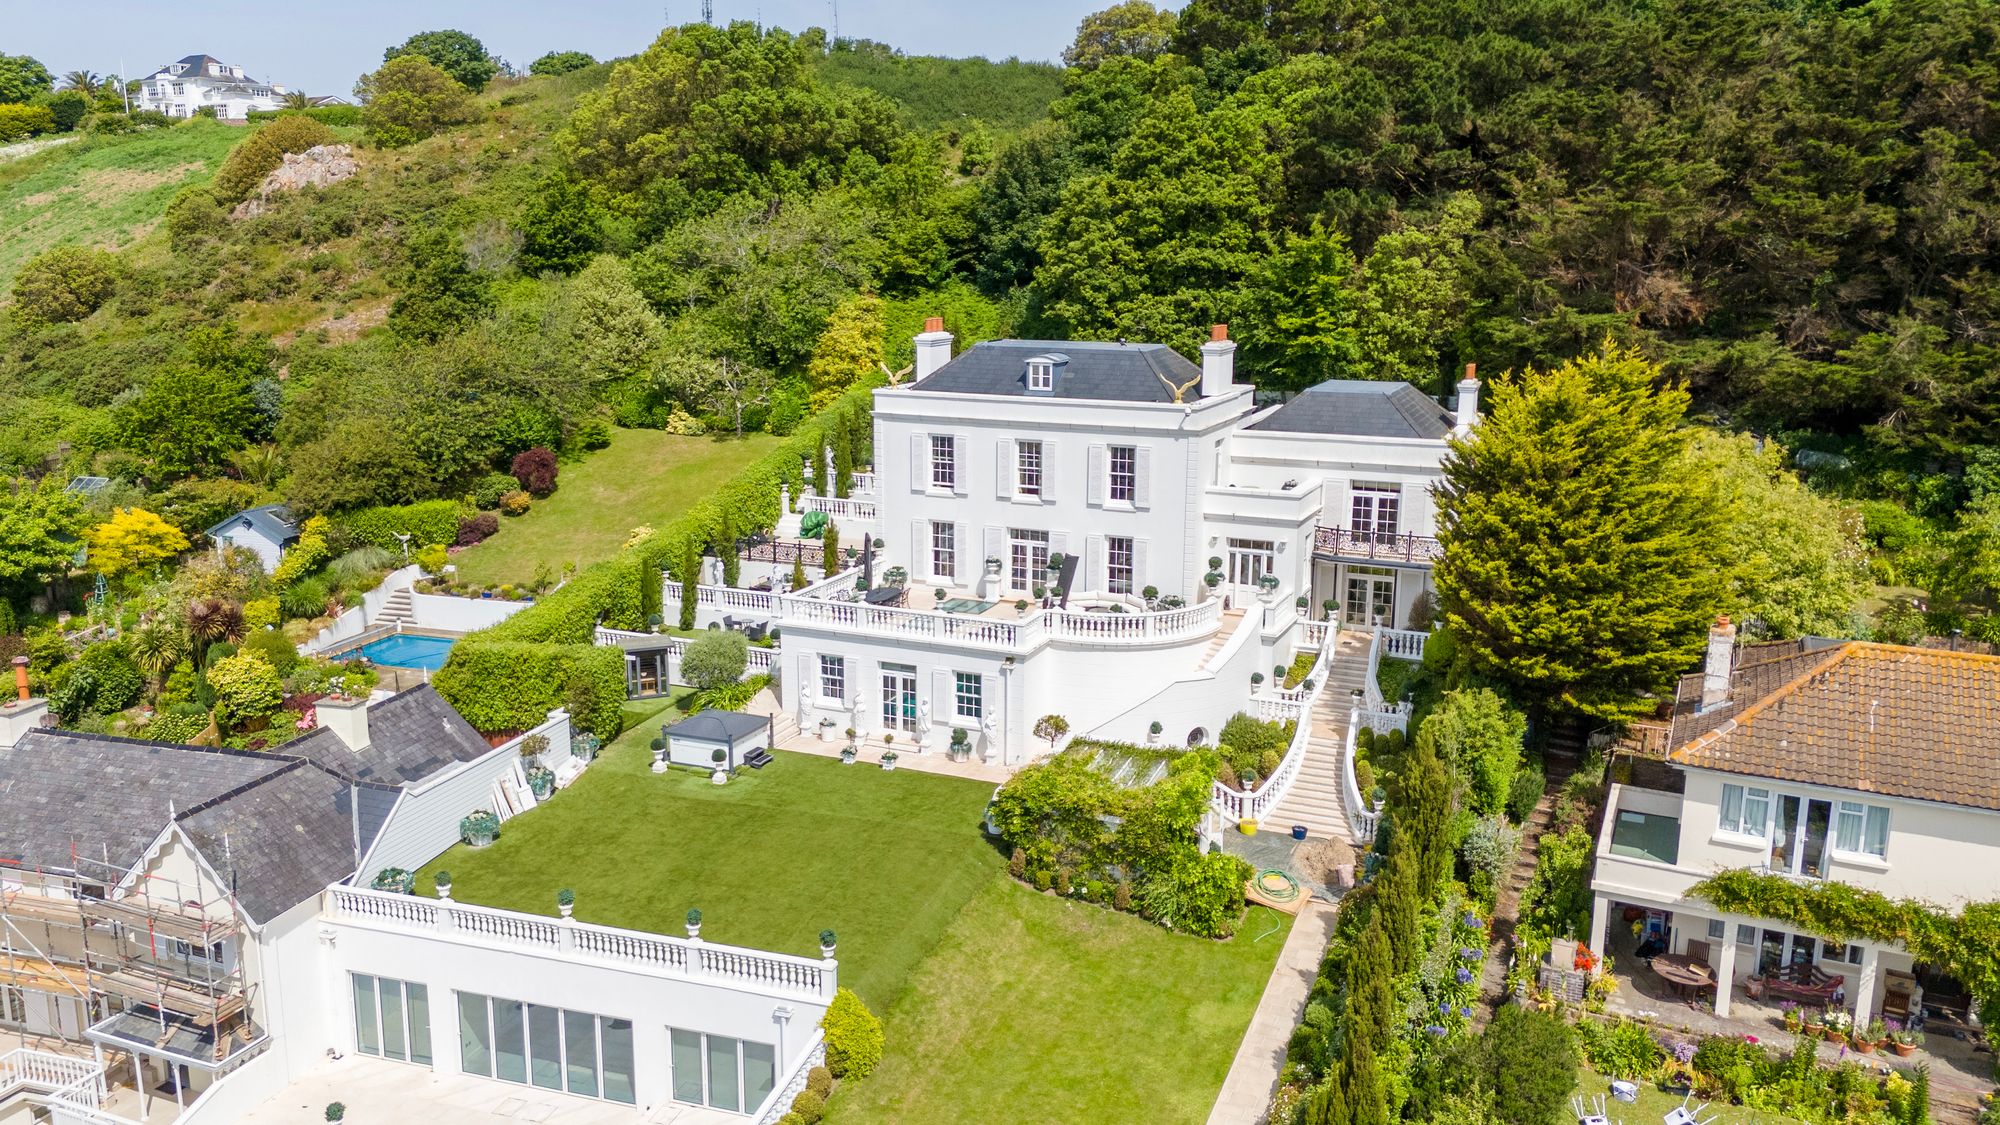 5 bed Property For Sale in St. Martin, Jersey